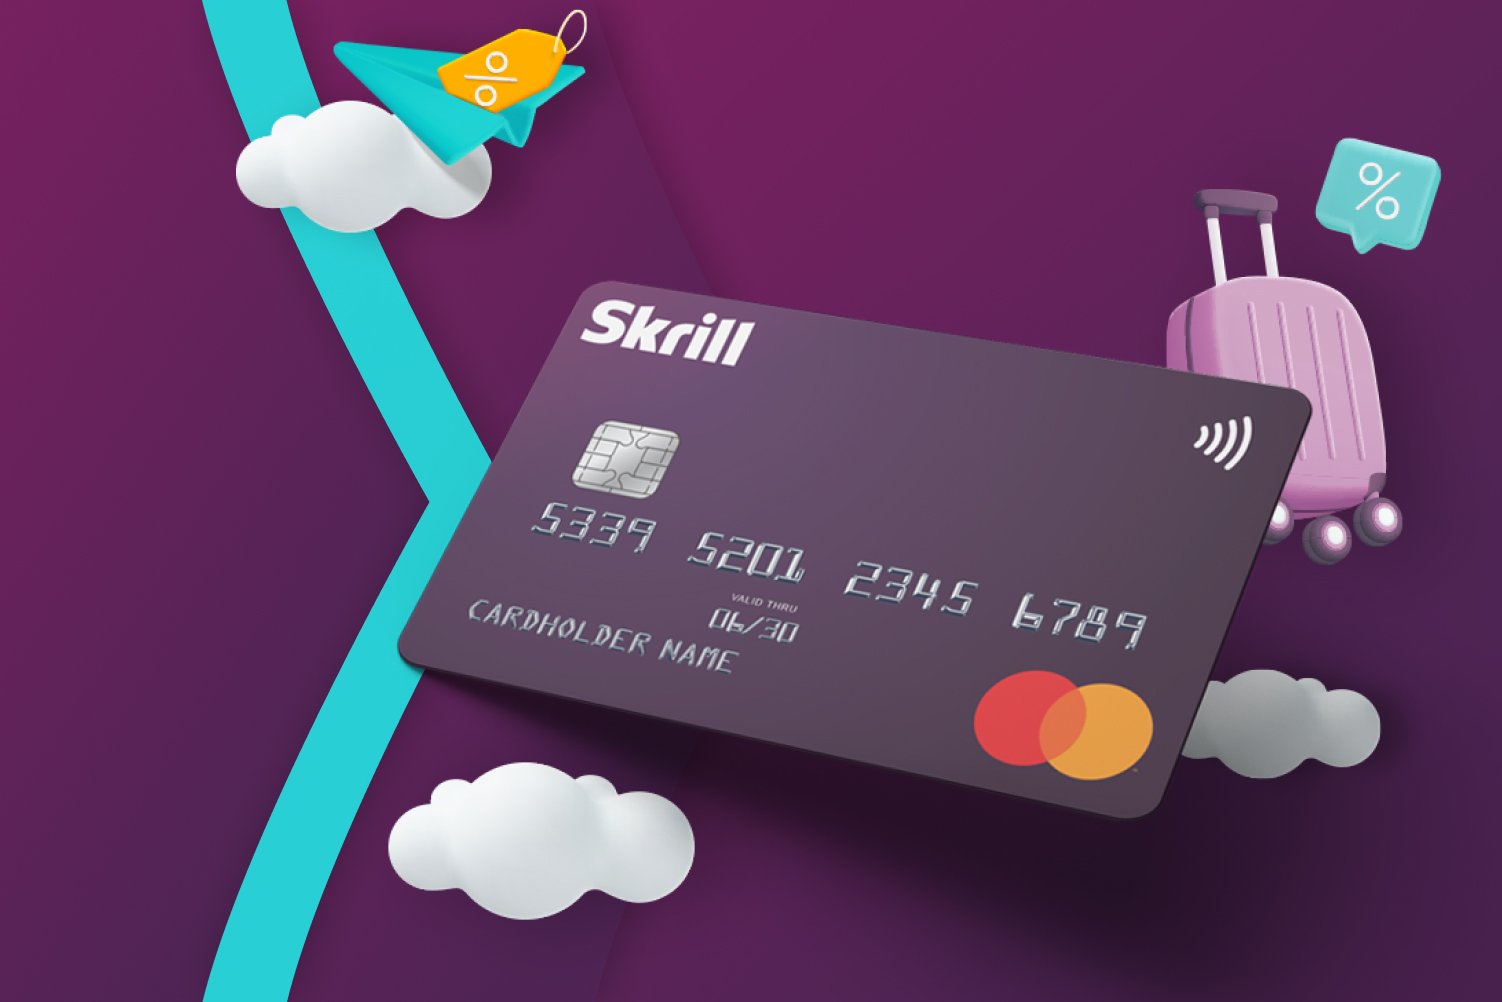 Skrill Prepaid Mastercard with clouds and suitcase icons